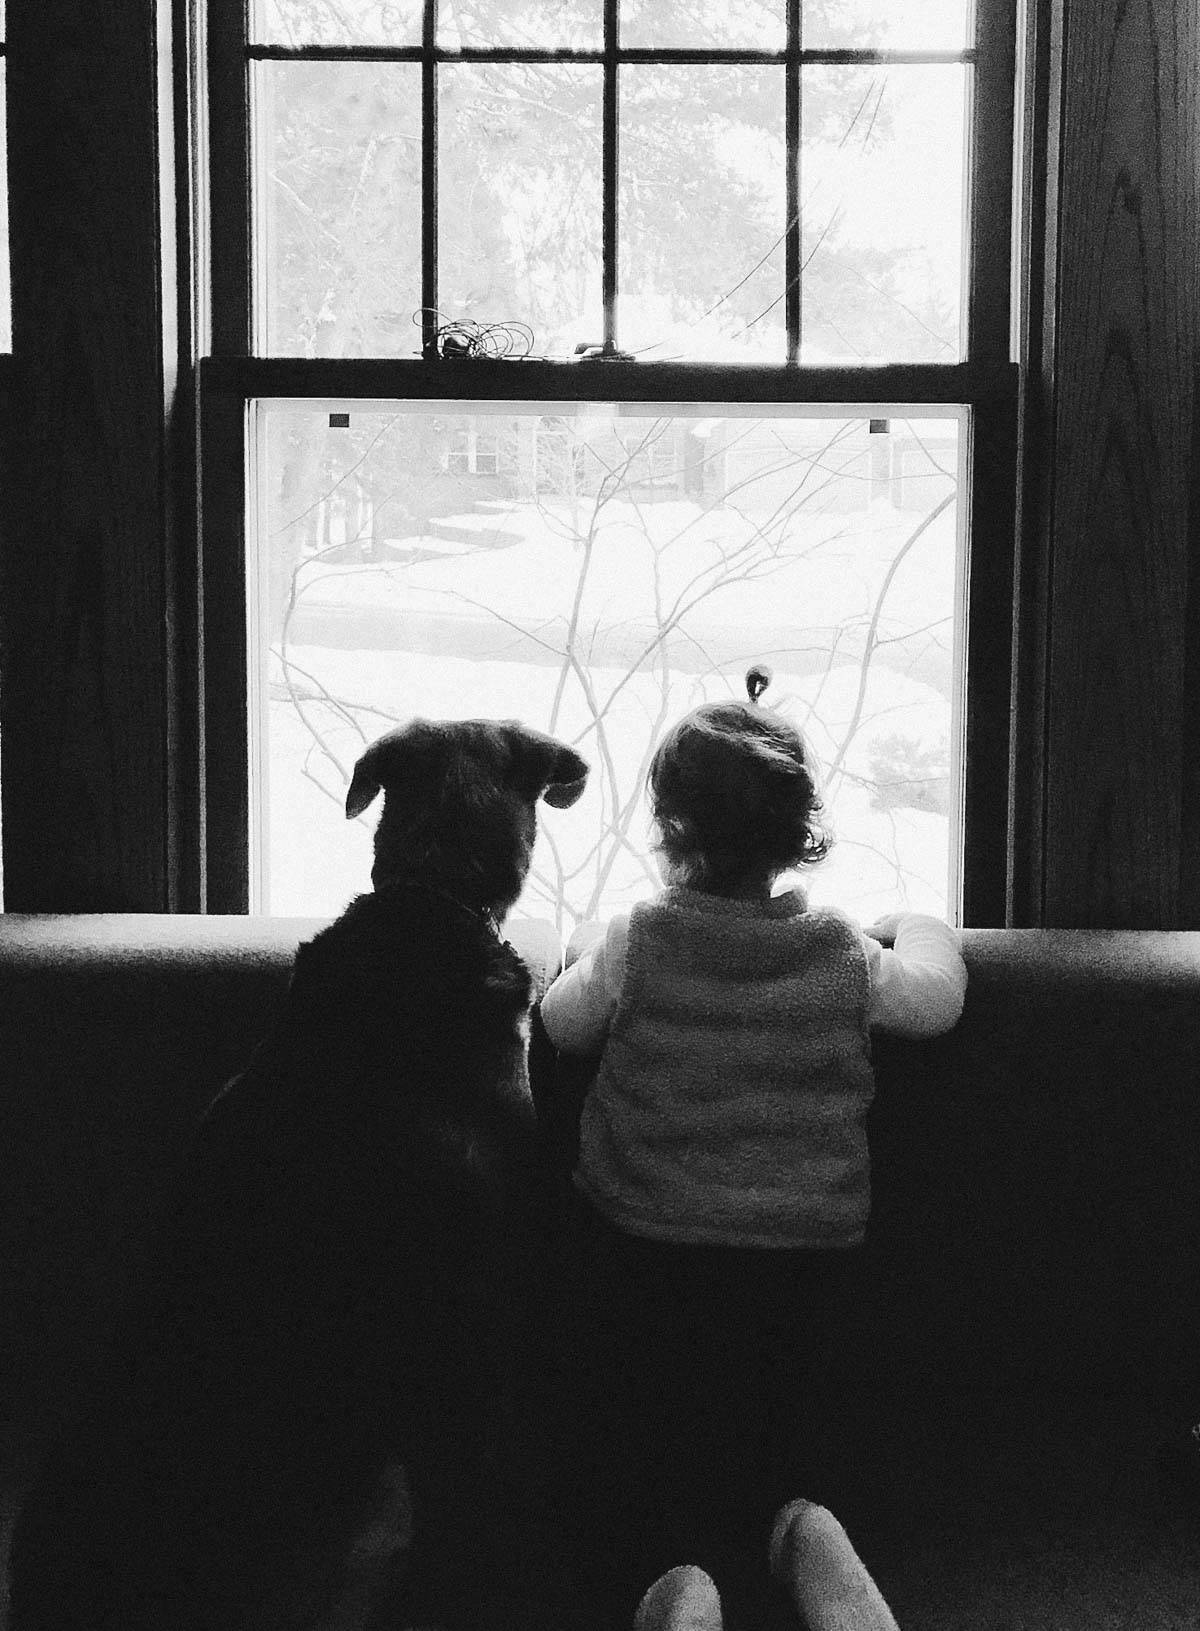 A girl and a dog peer out of the window.